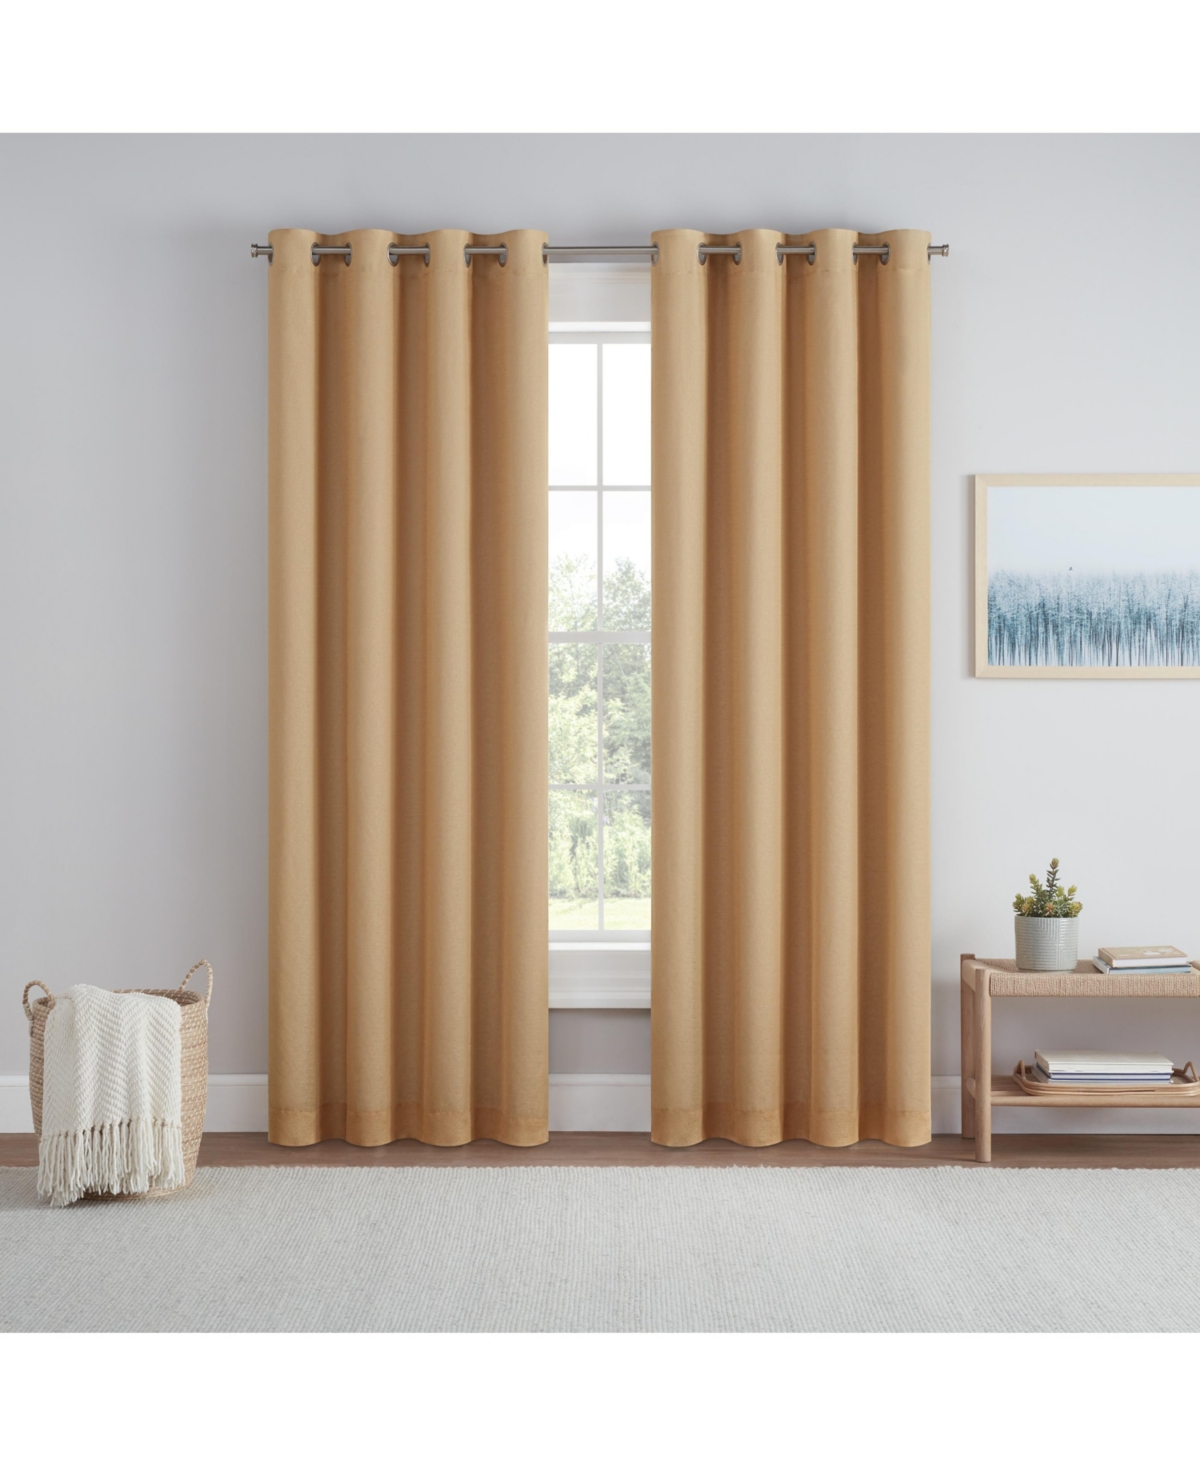 Dutchess 100% Blackout Lined Curtains, Solid Grommet (1 panel), 63" long x 50" wide, Flaxen - Gold